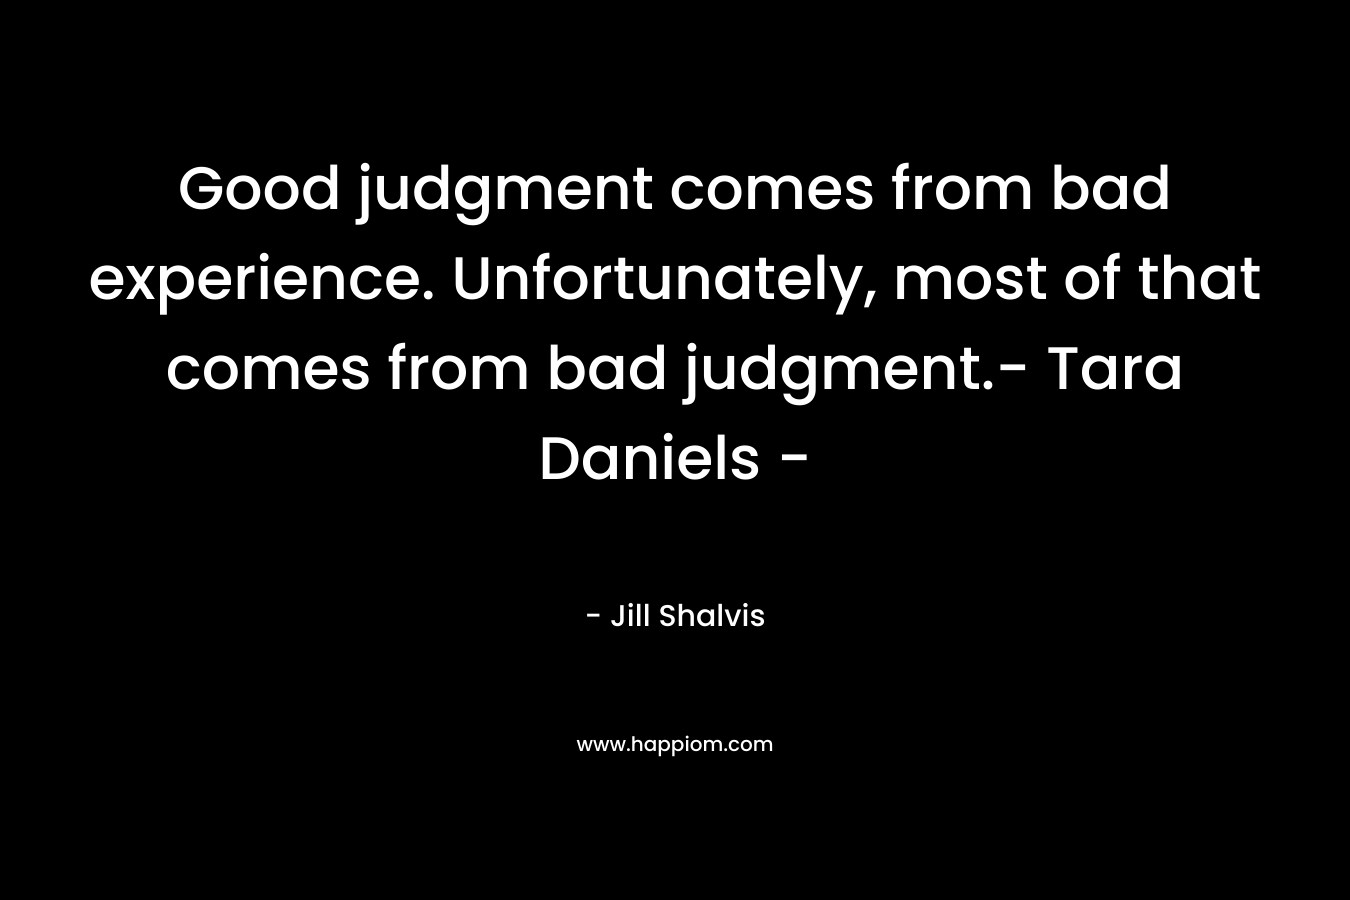 Good judgment comes from bad experience. Unfortunately, most of that comes from bad judgment.- Tara Daniels -